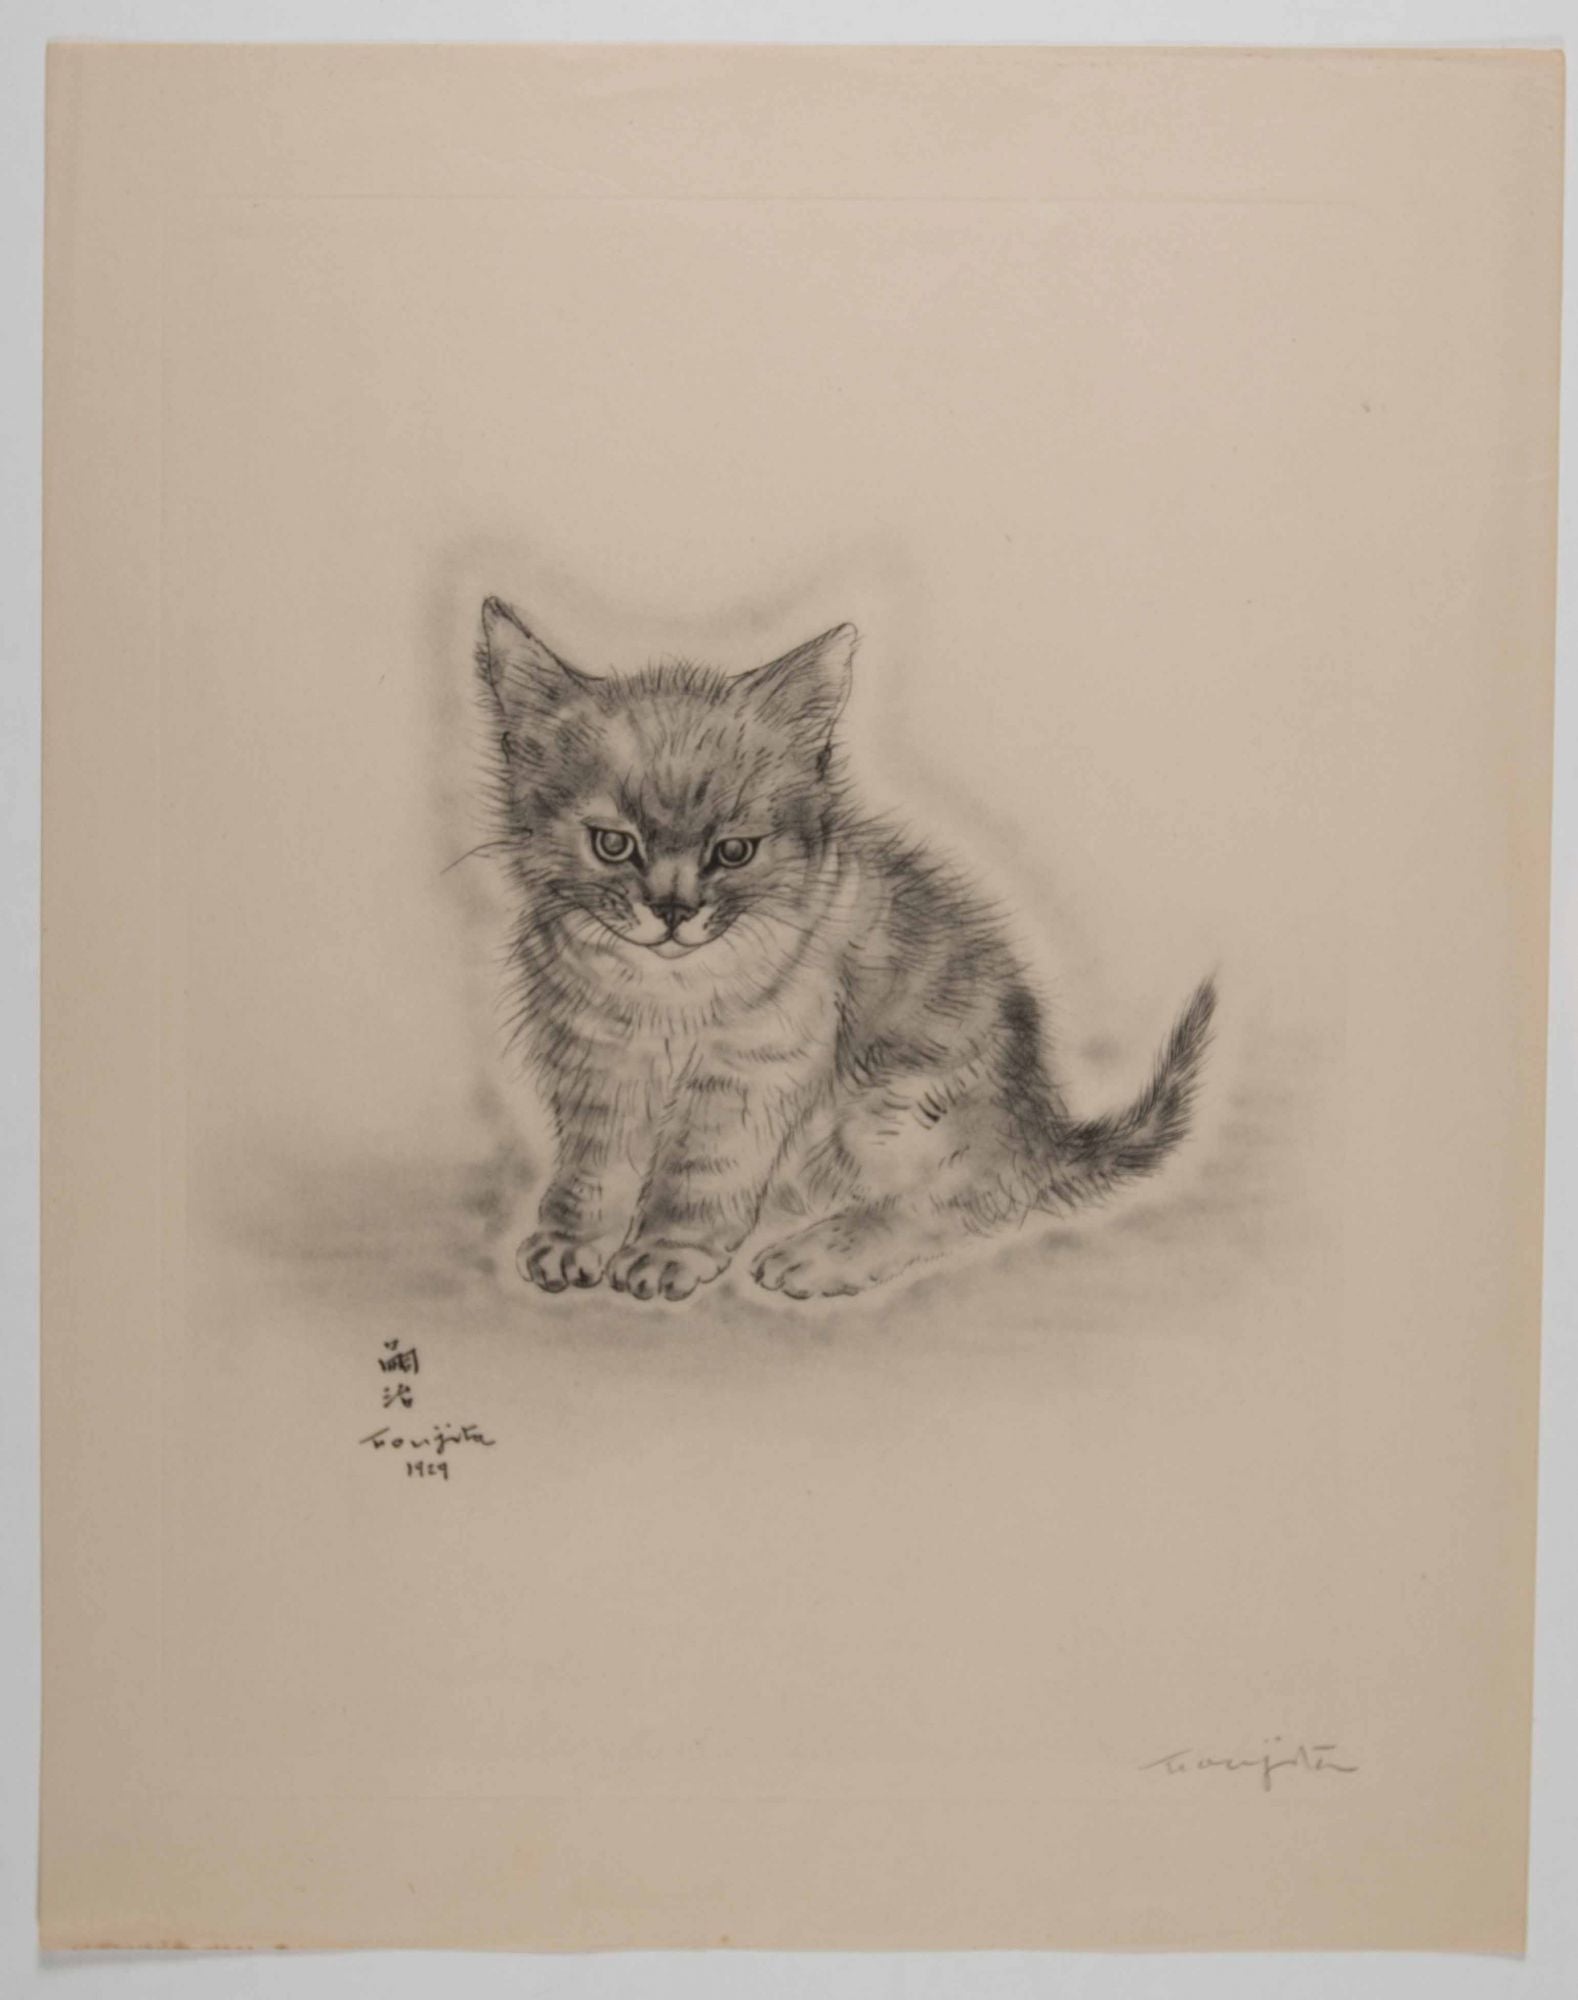 A Book of Cats, Being Twenty Drawings by Foujita UNIQUE COPY, WIYH THE  ADDITIONAL SUITE OF PLATES, THREE SIGNED IN PENCIL by Tsuguharu Foujita, 